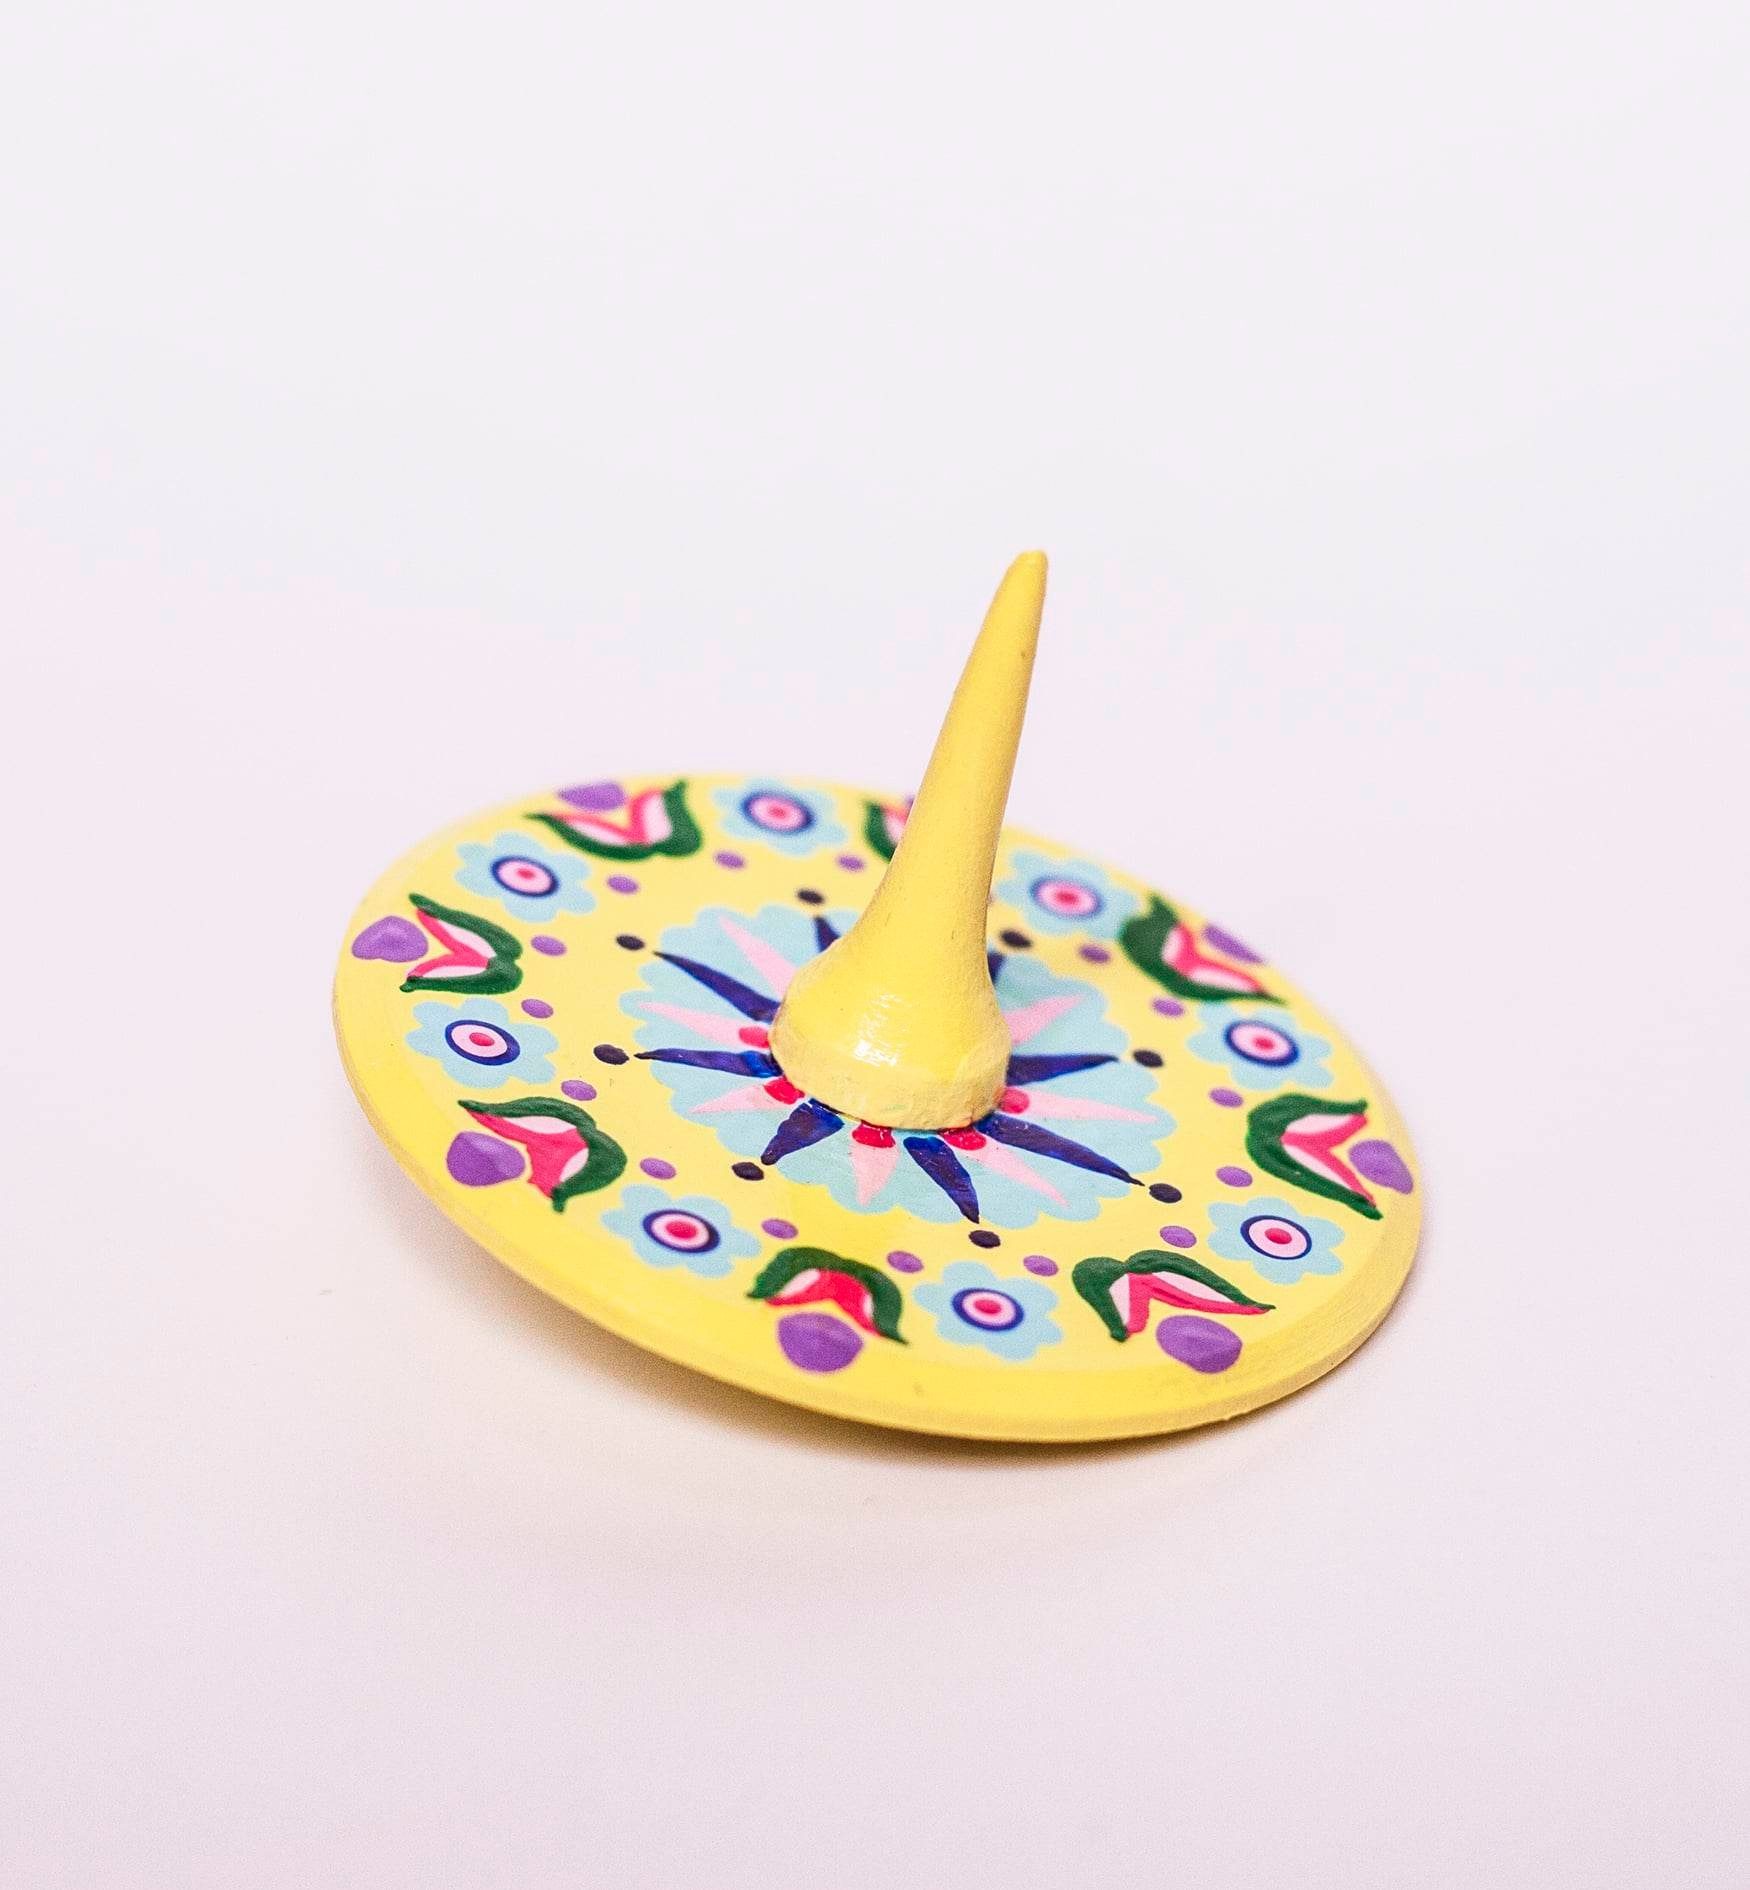 Wooden spinning top, Samchykivka Hand painted – 1 Yellow spinning toy